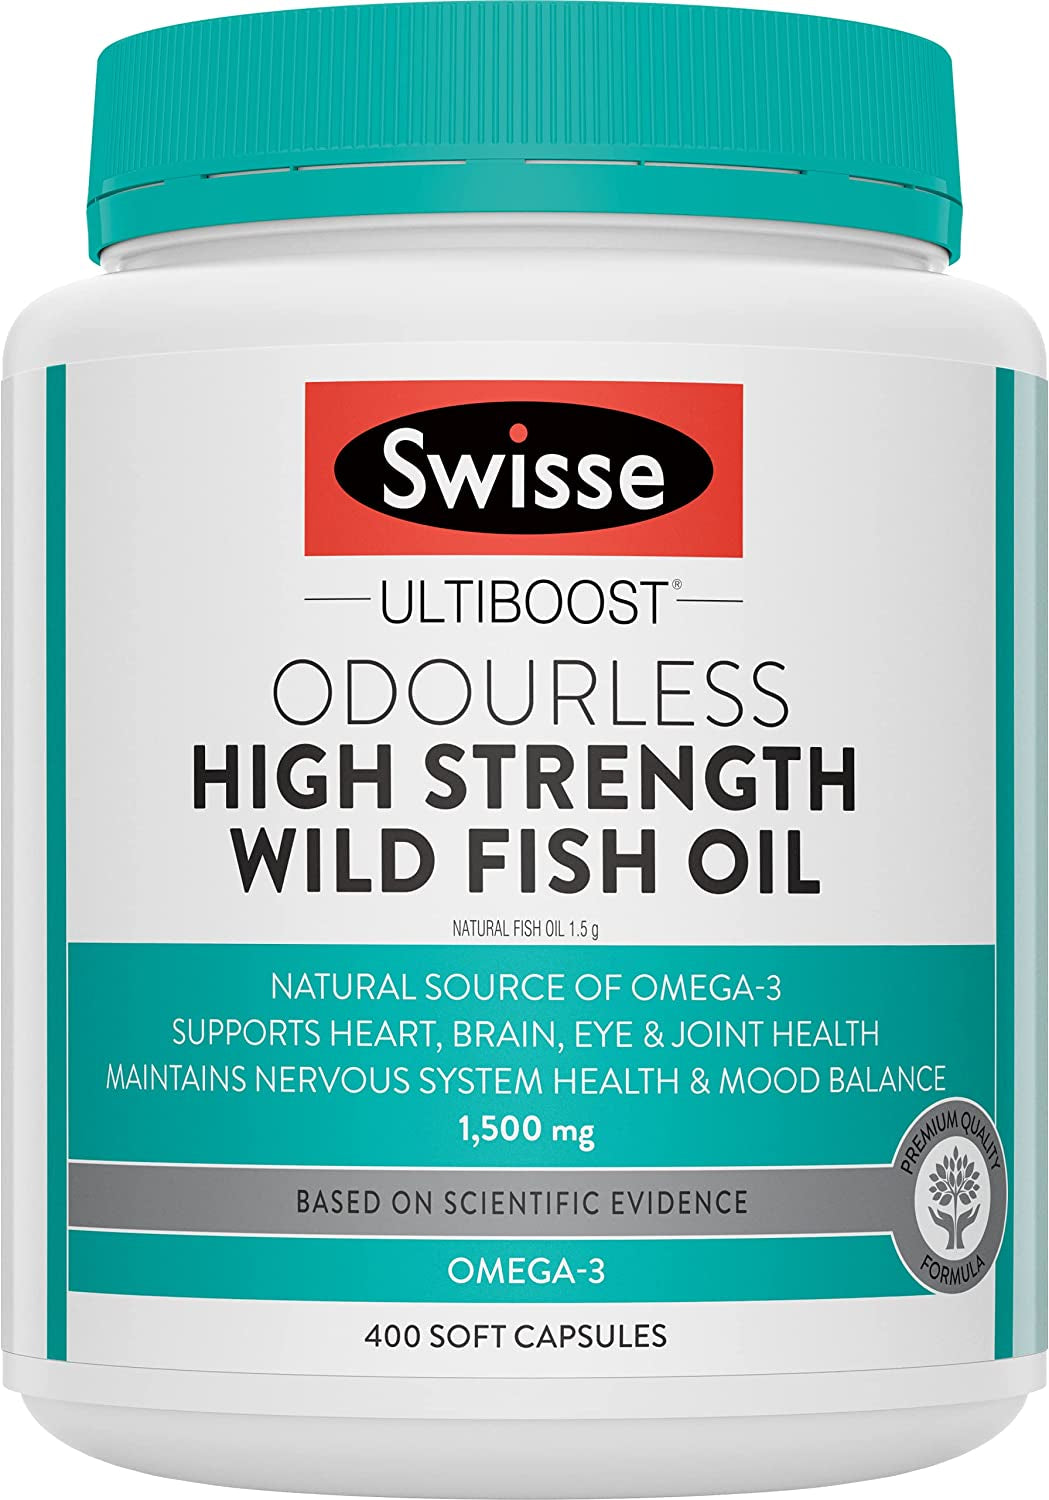 Ultiboost Odourless High Strength Wild Fish Oil | Source of Omega|3 | 400 Capsules